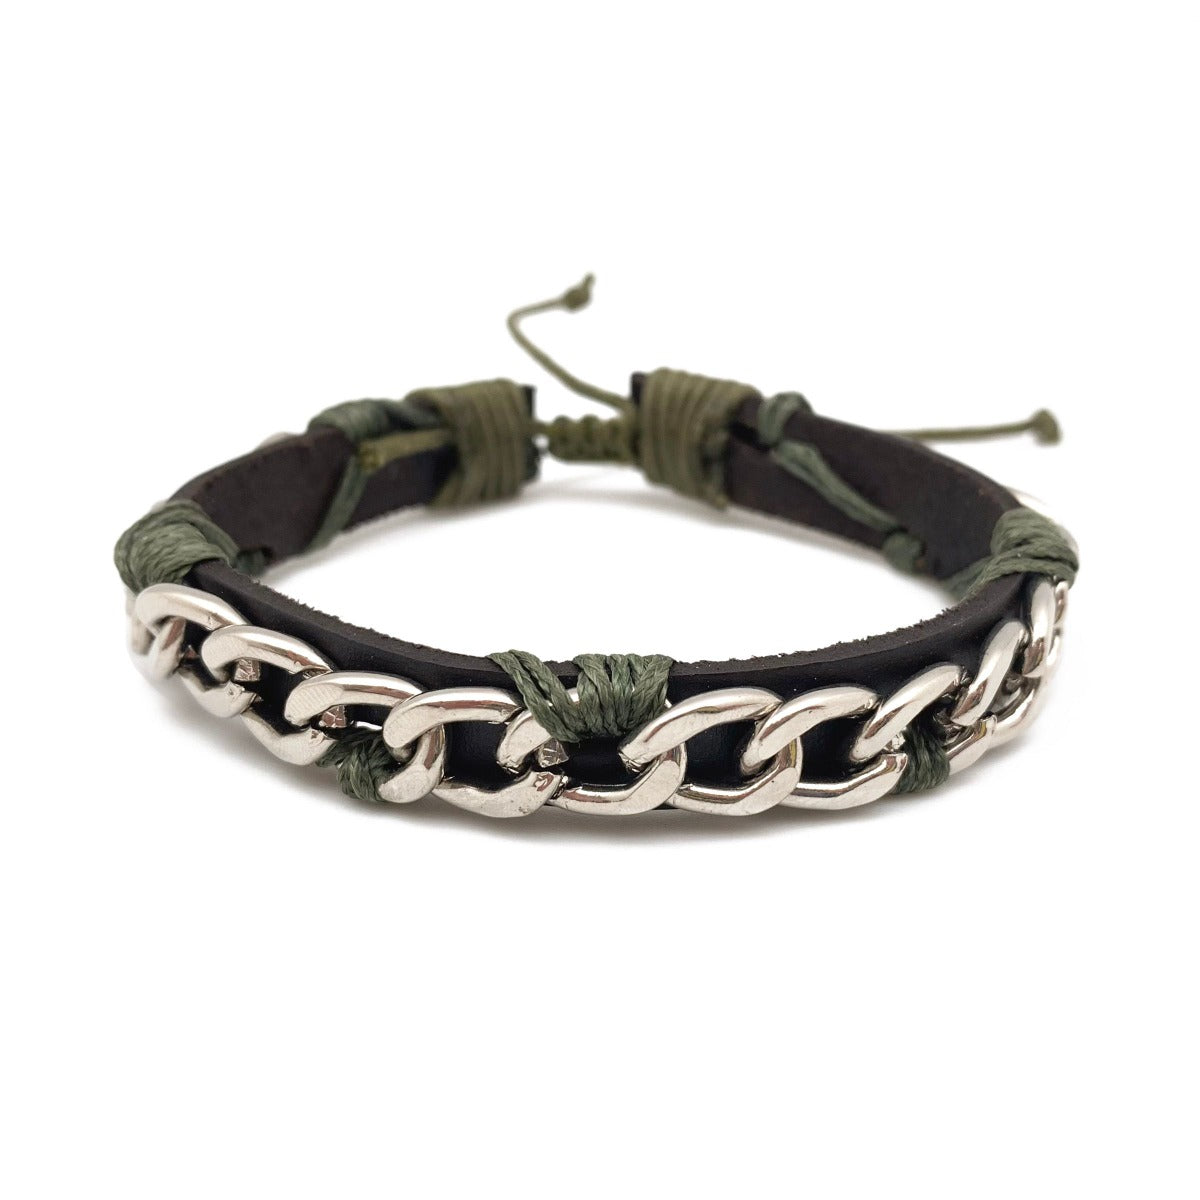 black leather band with chain bracelet on a white background.